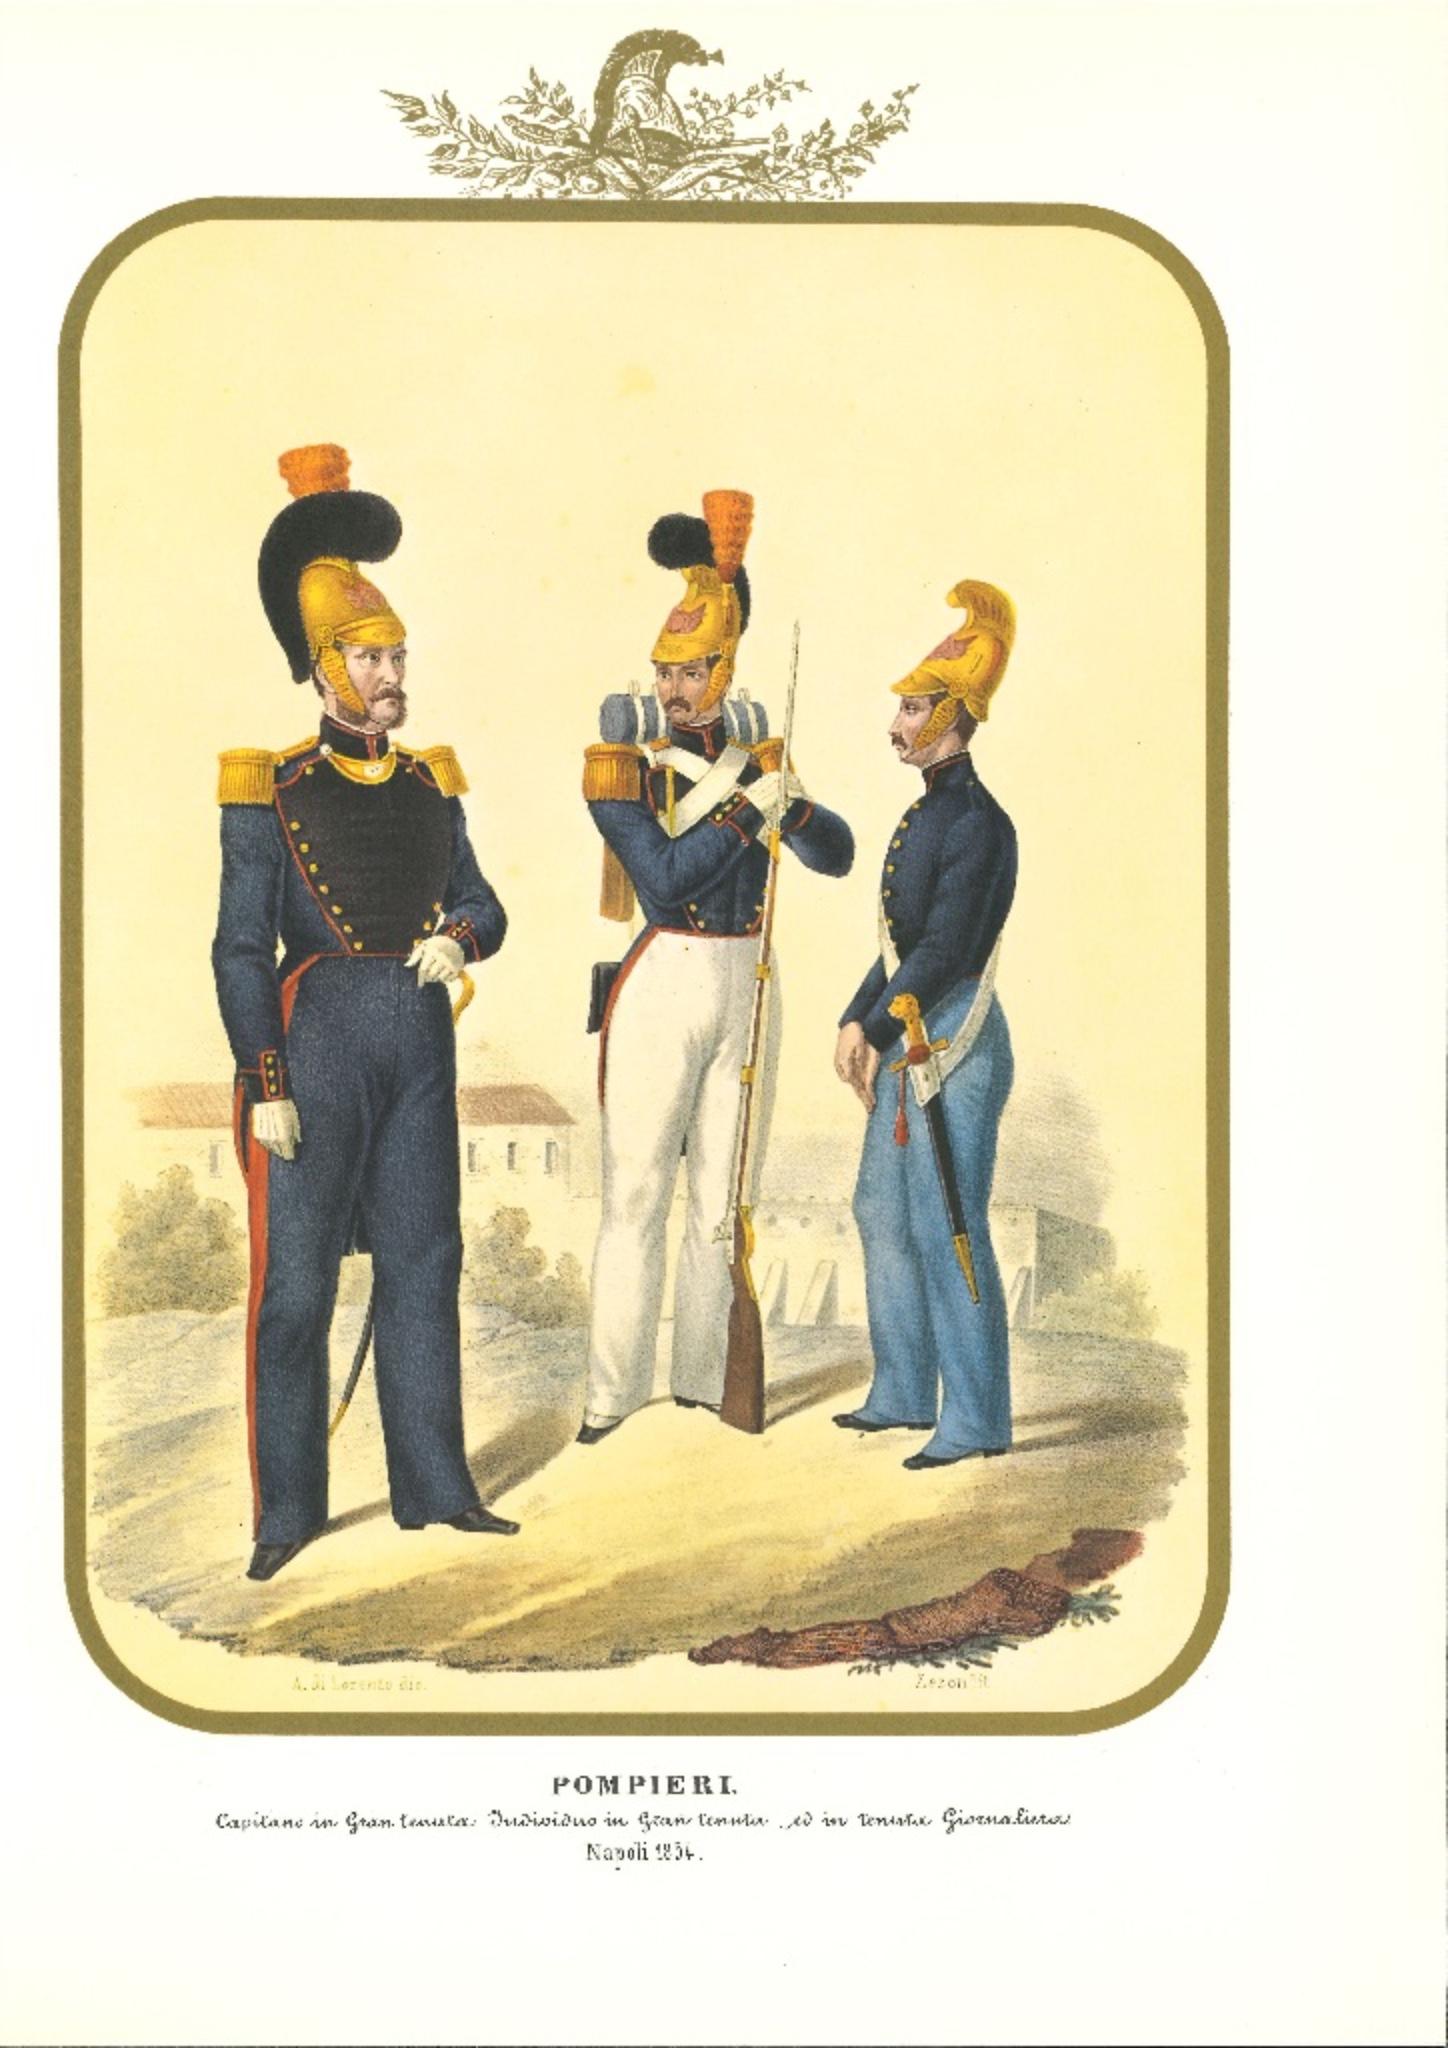 Firefighters is a lithograph by Antonio Zezon. Naples 1854.

Interesting colored lithograph which describes some members of the Army: on the left, a Captain in great condition ; on the center, an Individual in great estate; on the right, an